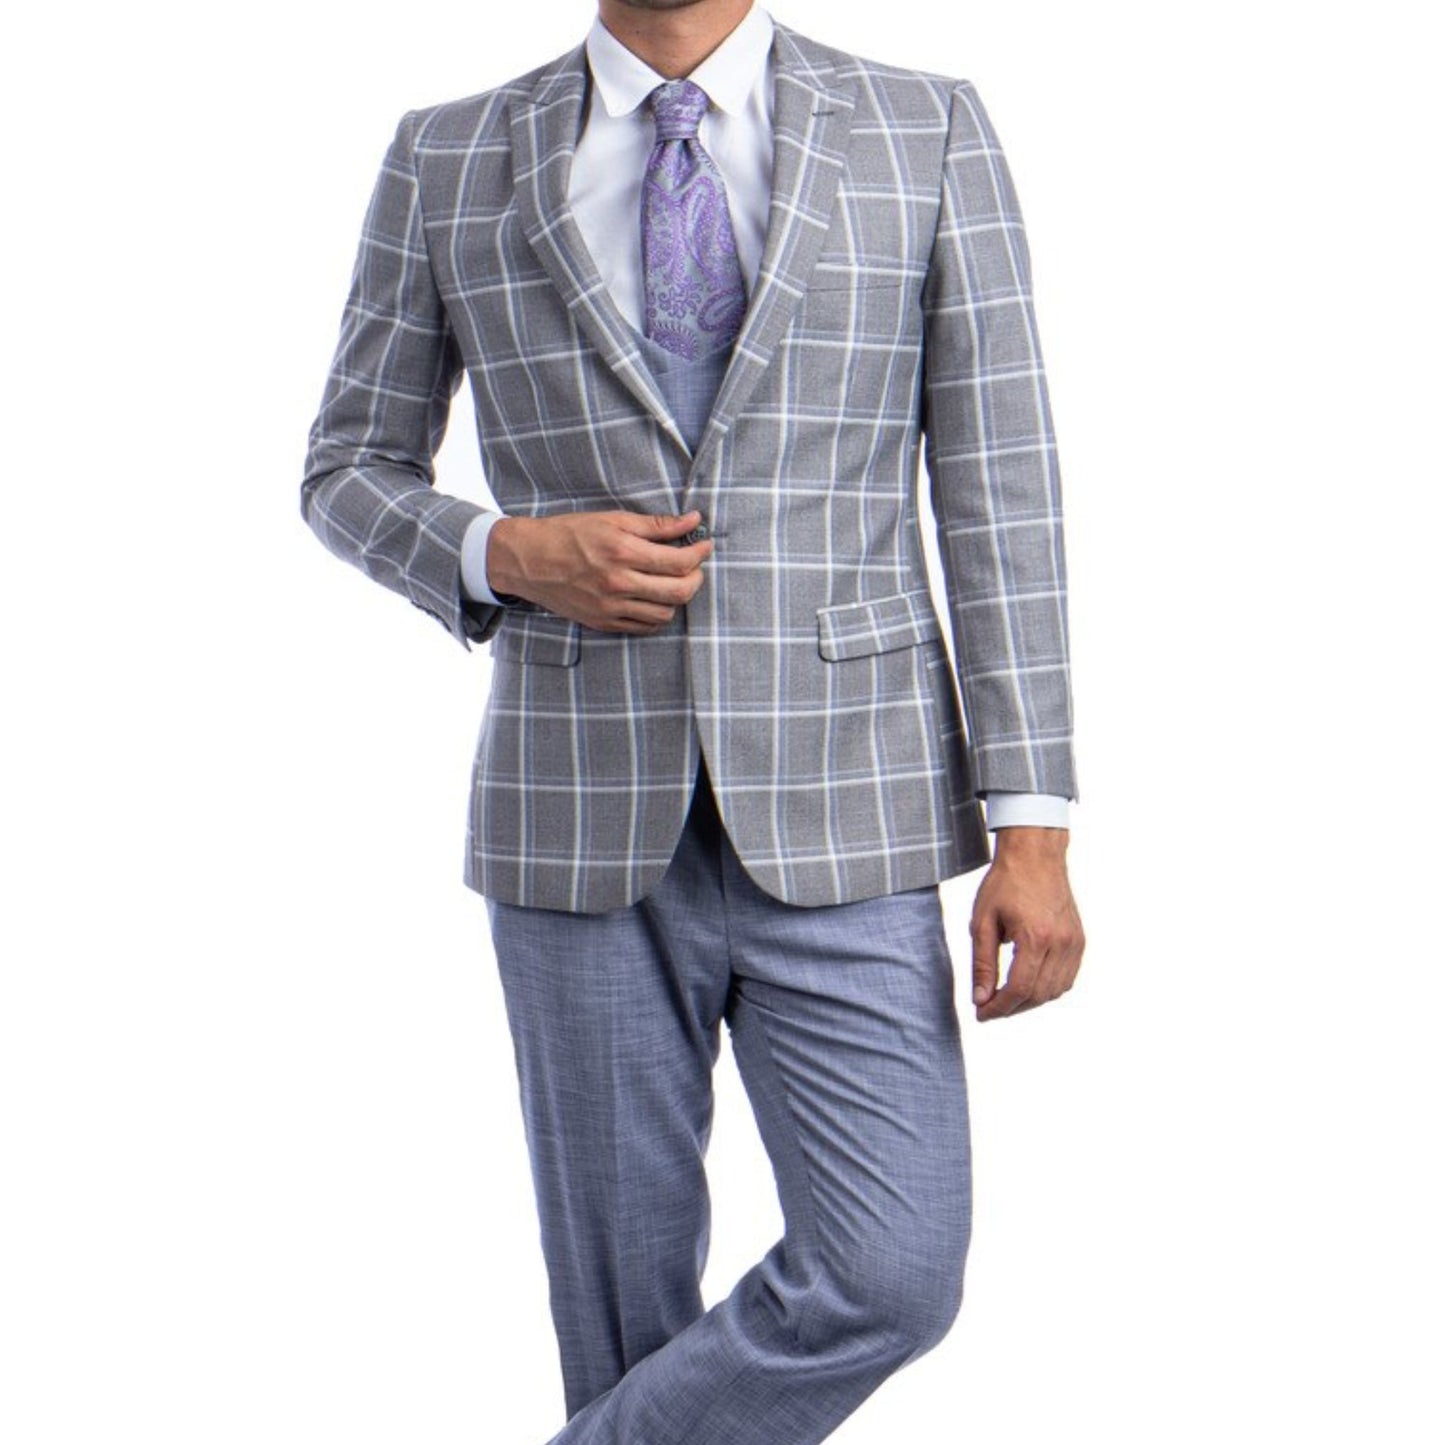 Grey/White Fall Suit